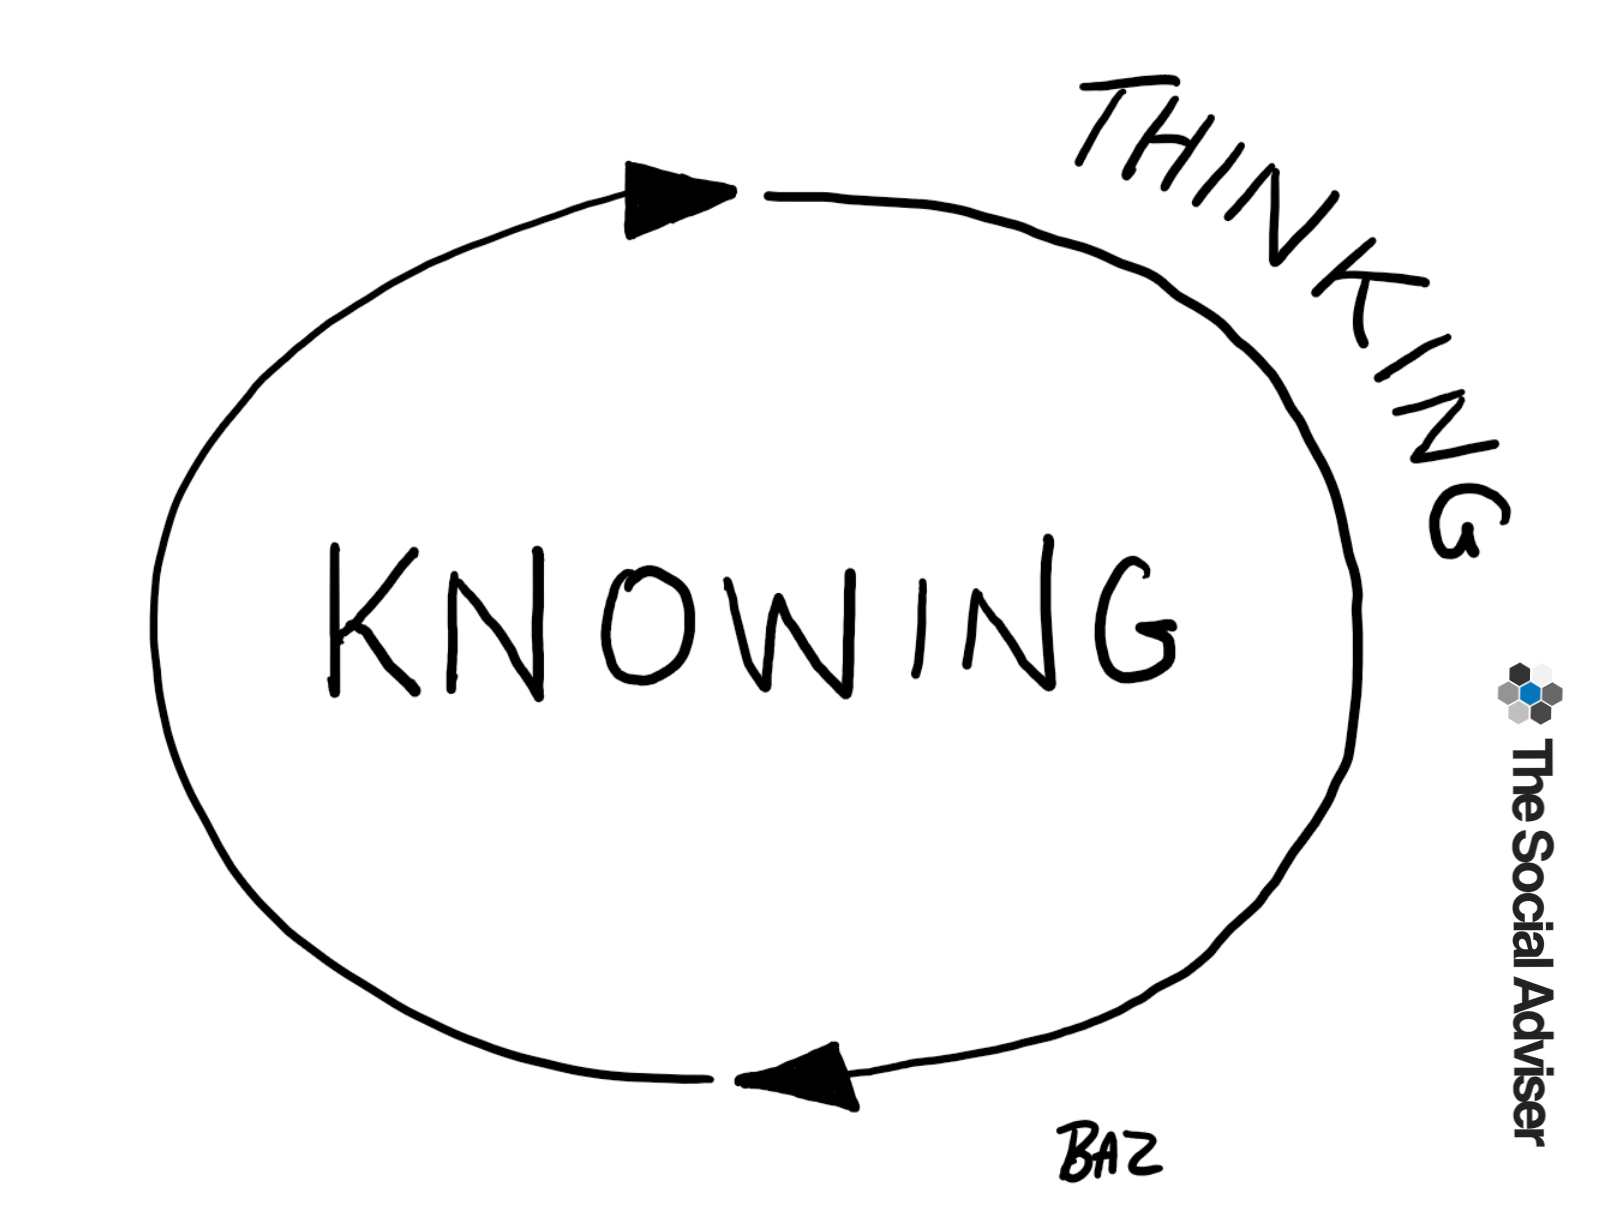 Thinking vs Knowing